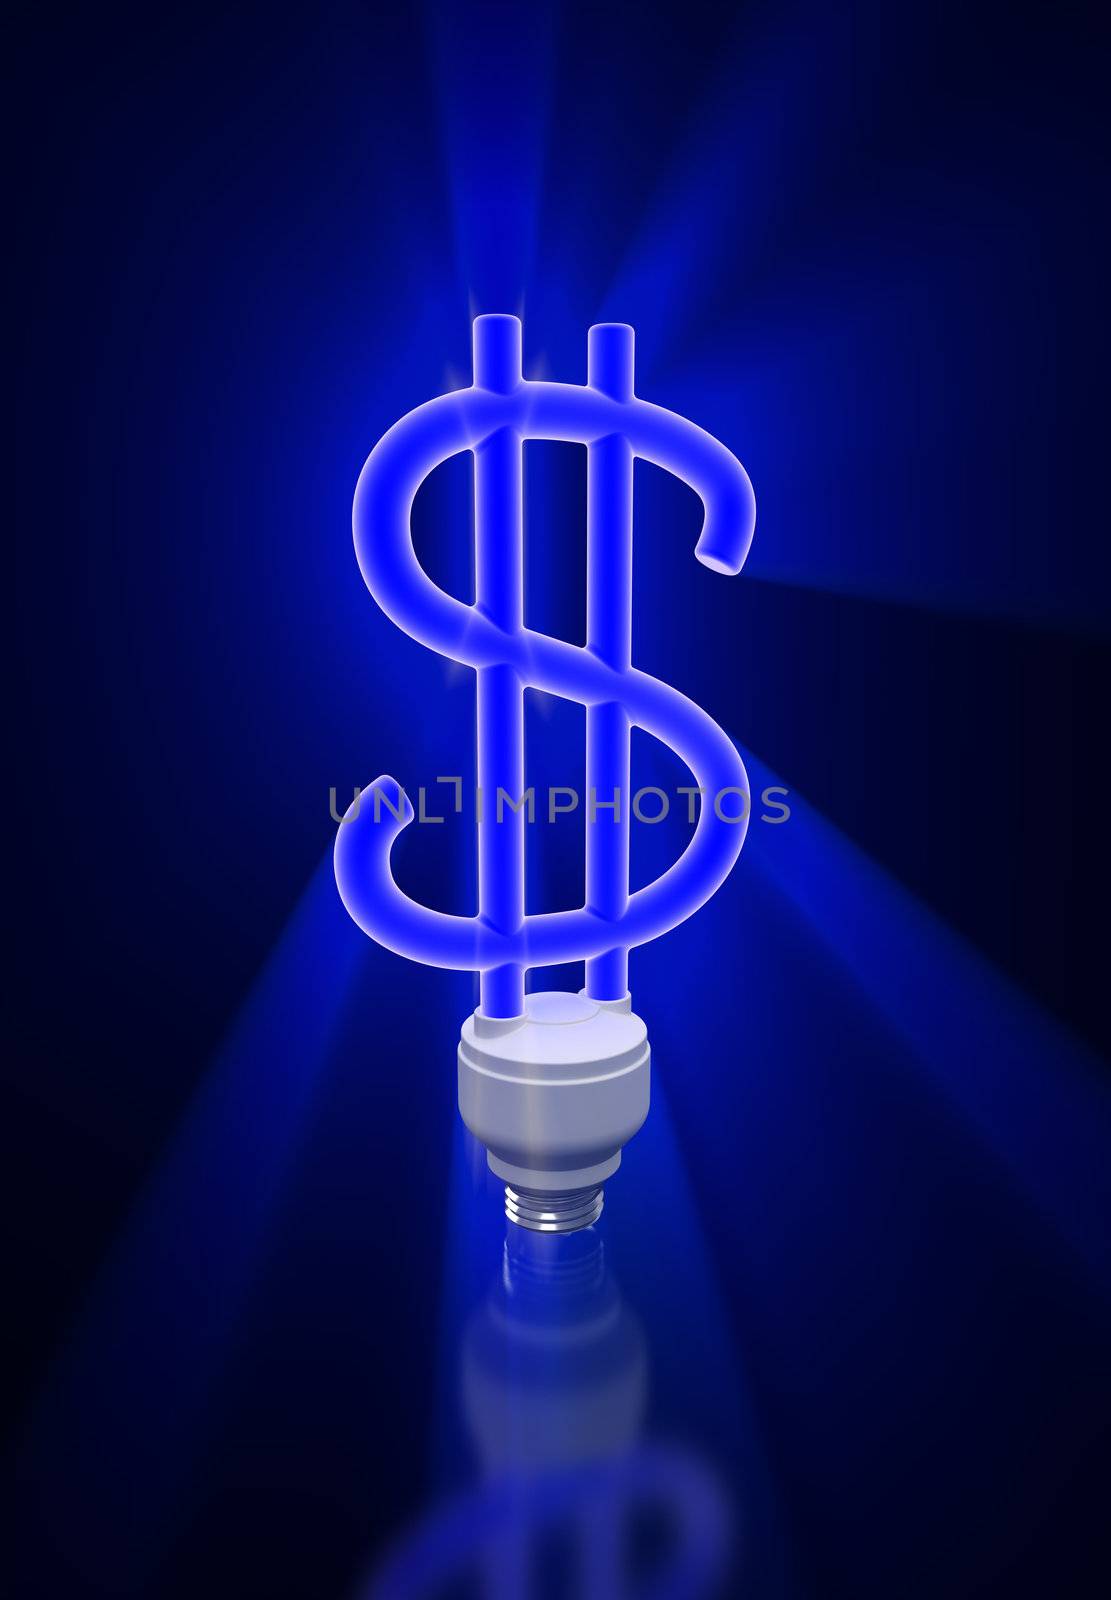 Neon dollar. Image generated in 3D application. High resolution image.